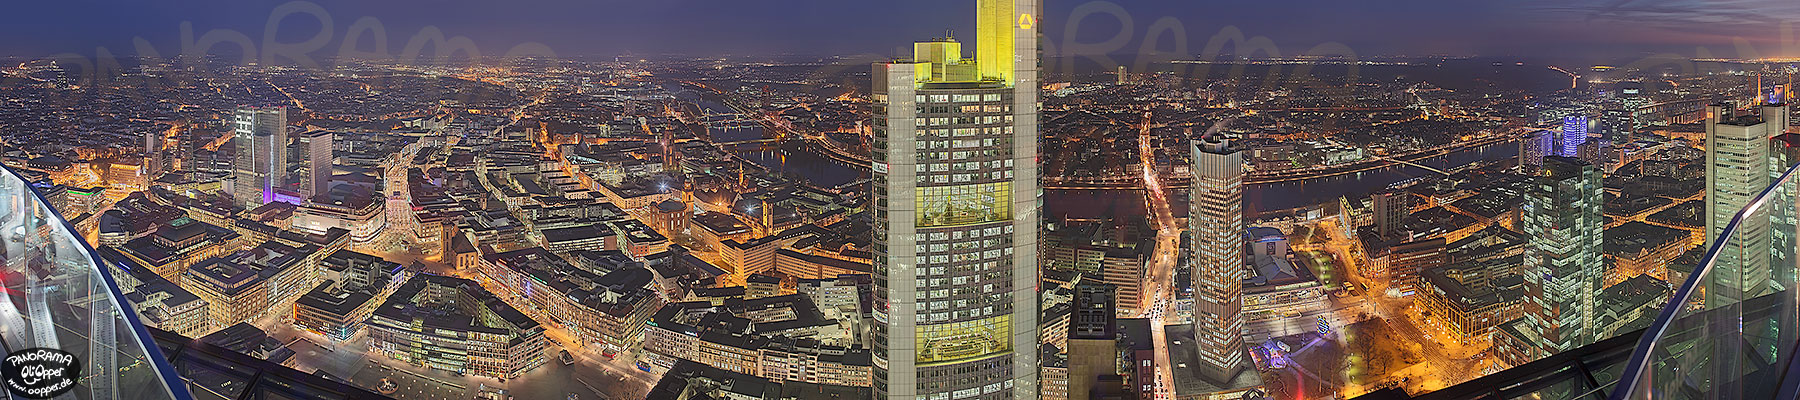 Frankfurt - Maintower - sd - p460 - (c) by Oliver Opper